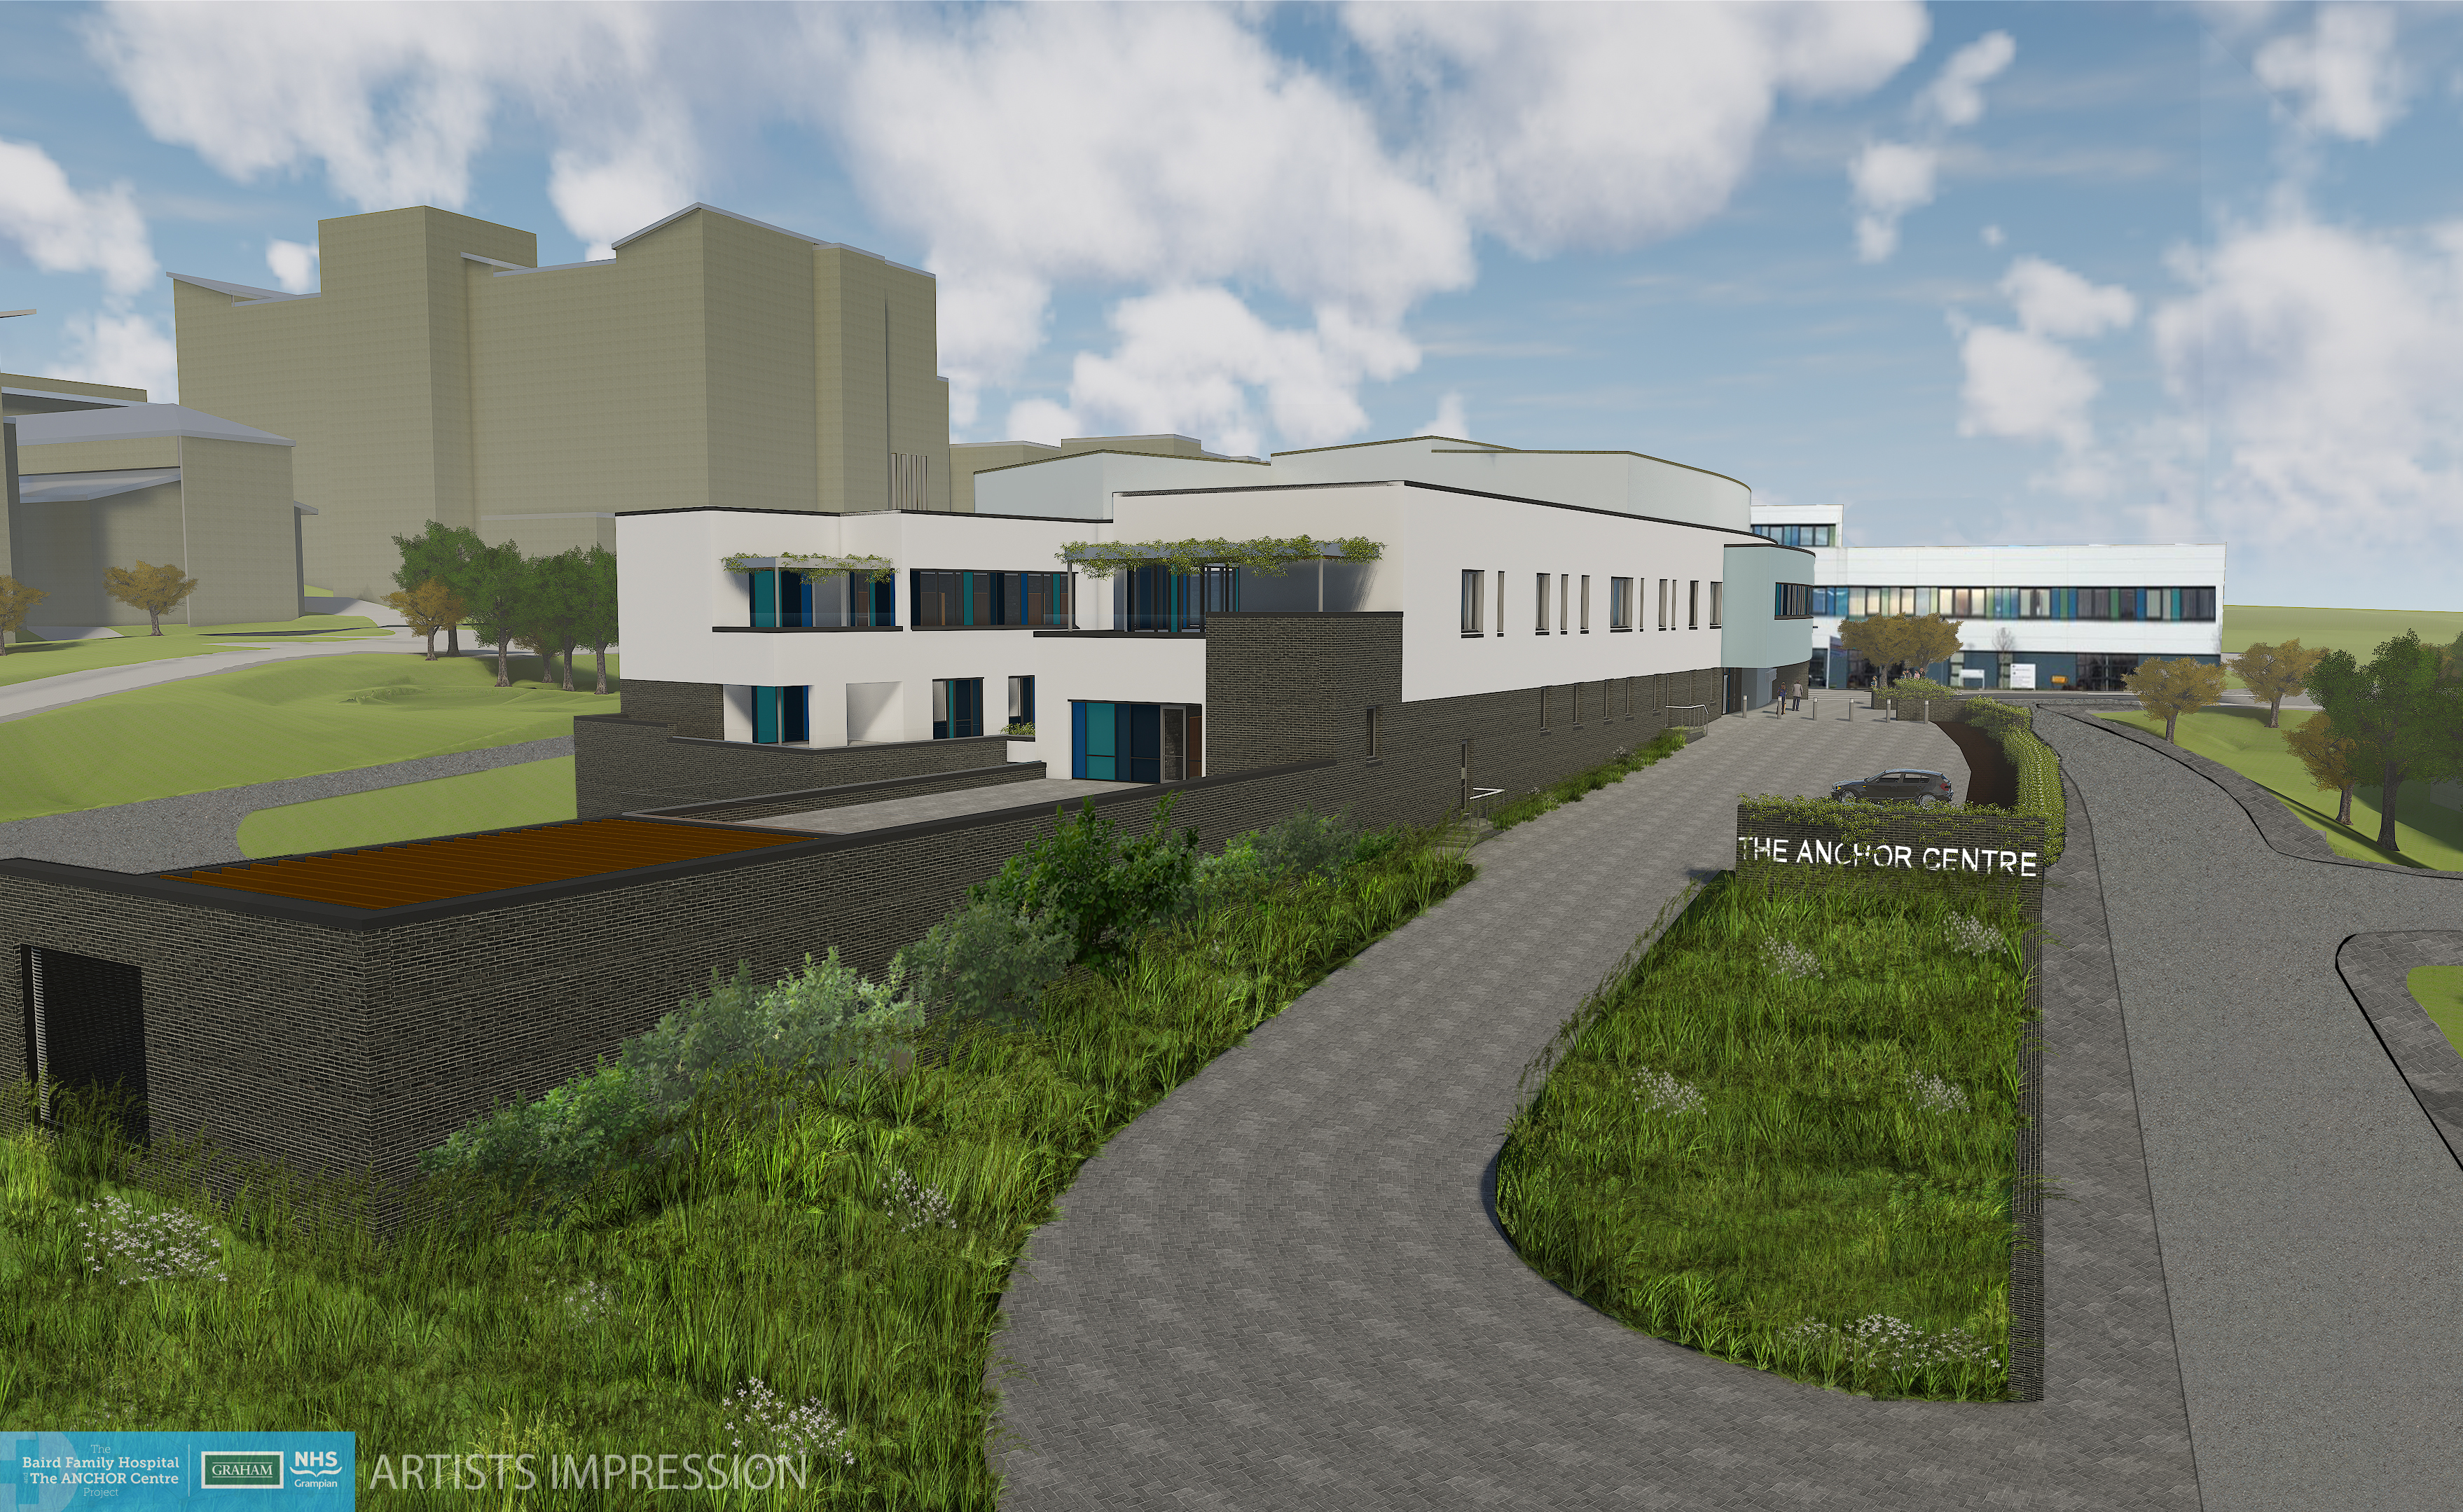 An artist's impression of the new ANCHOR Centre planned for the Foresterhill Health Campus.